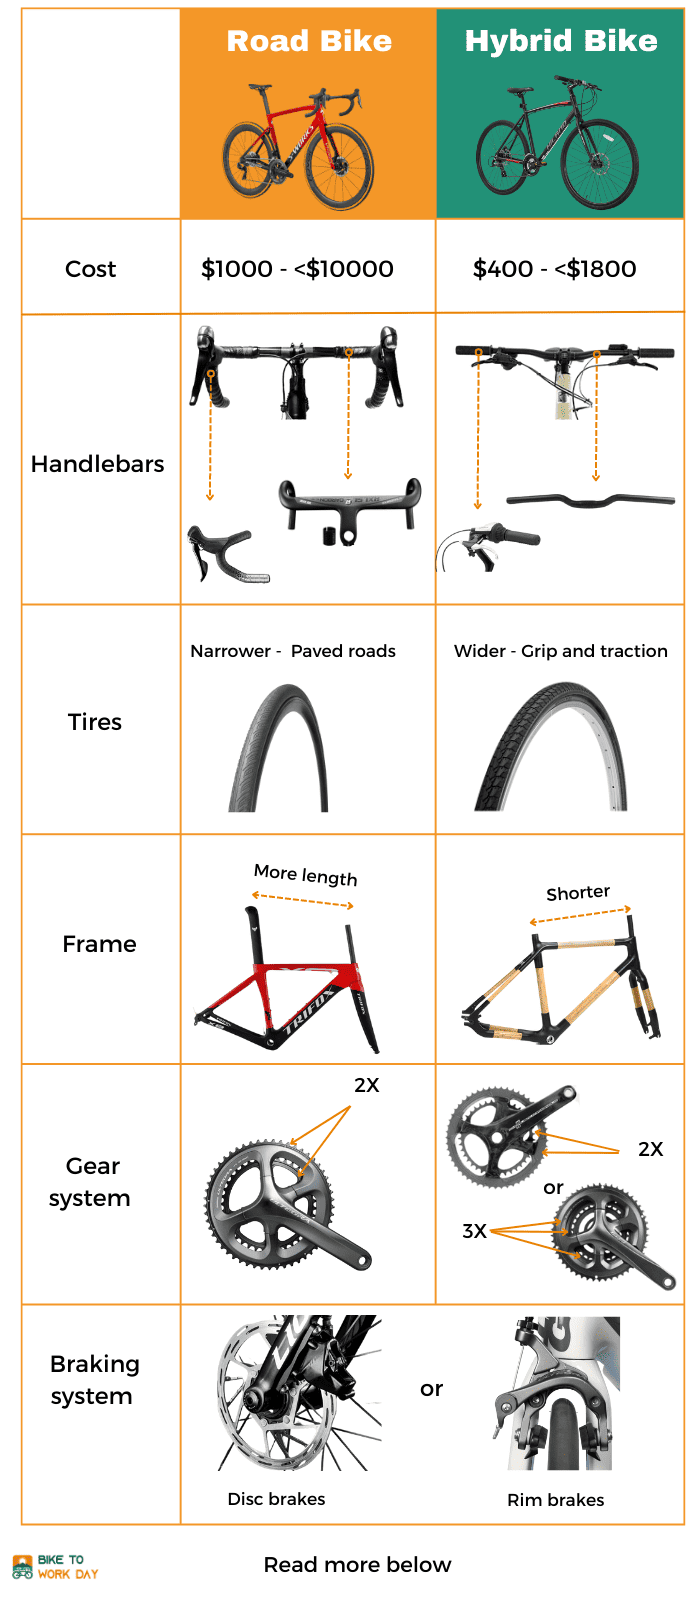 hybrid-bicycle-comparisons